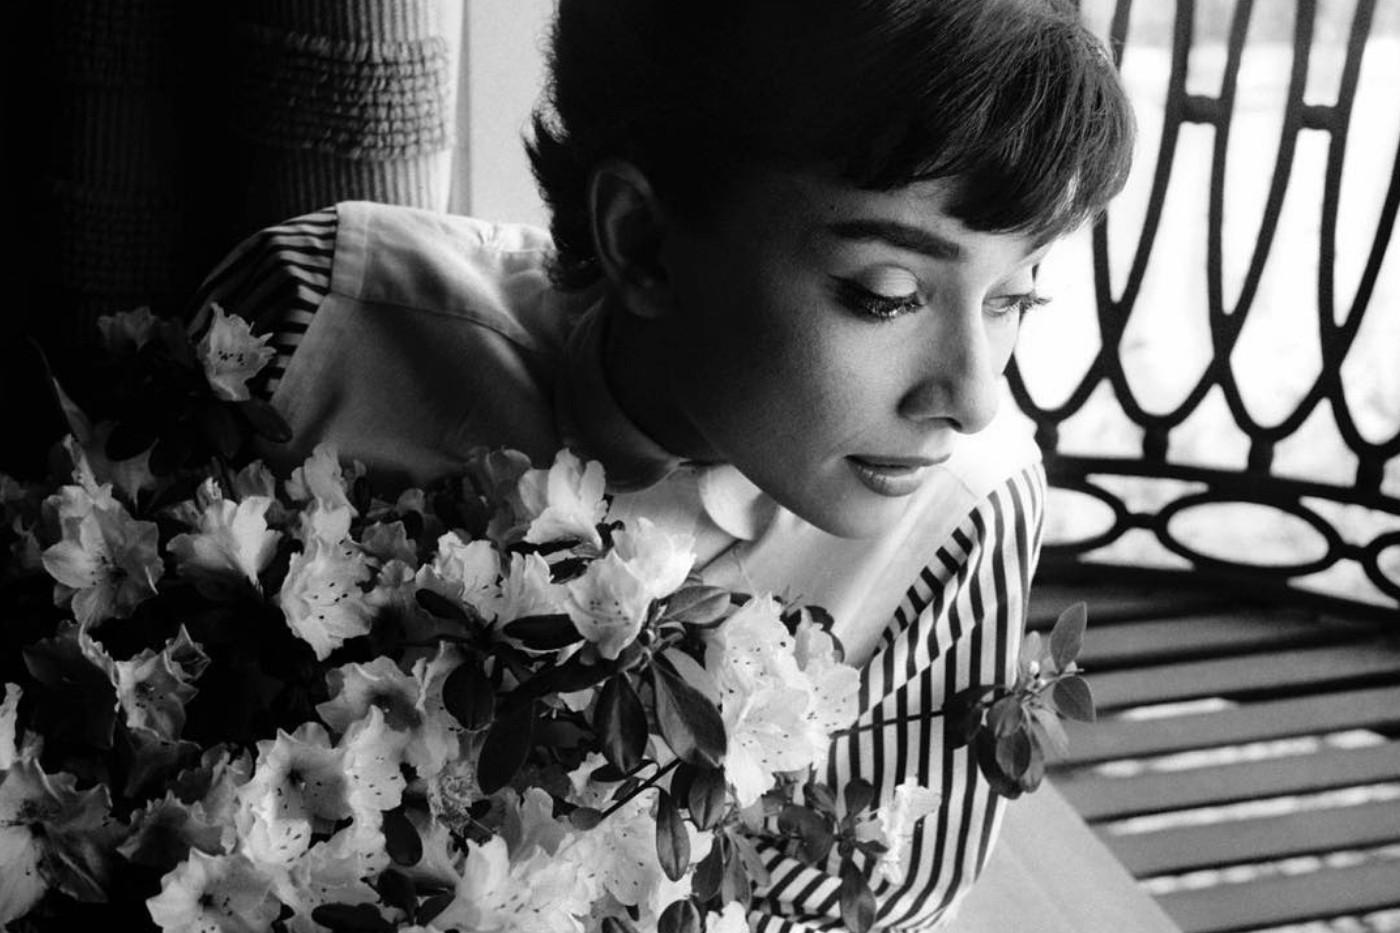 Audrey Hepburn photographed by Bob Willoughby; photo credit: Bob Willoughby